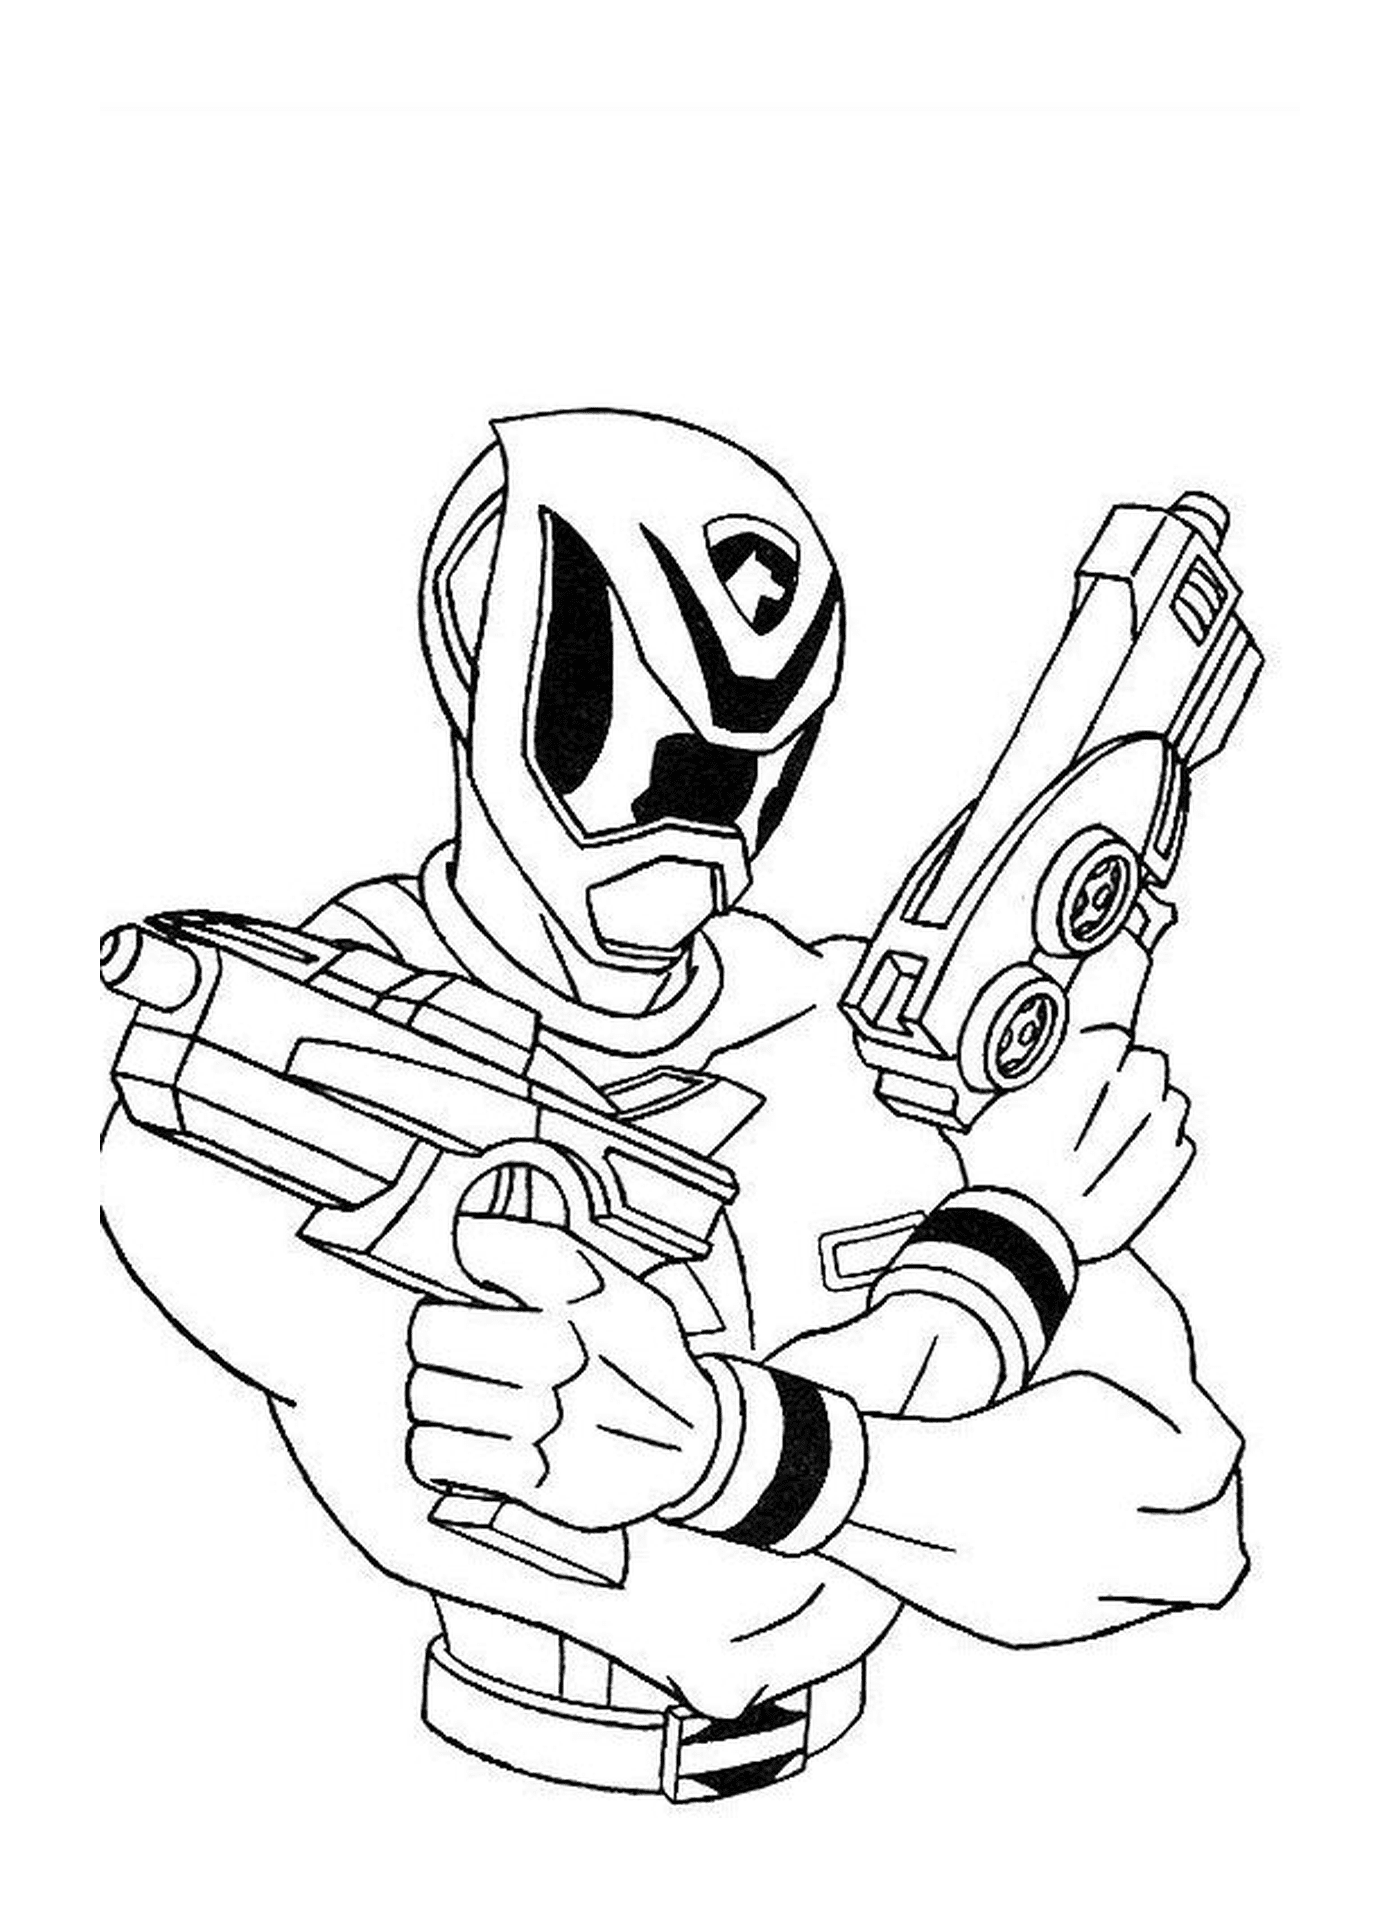  Presence of a Power Ranger with rifles 